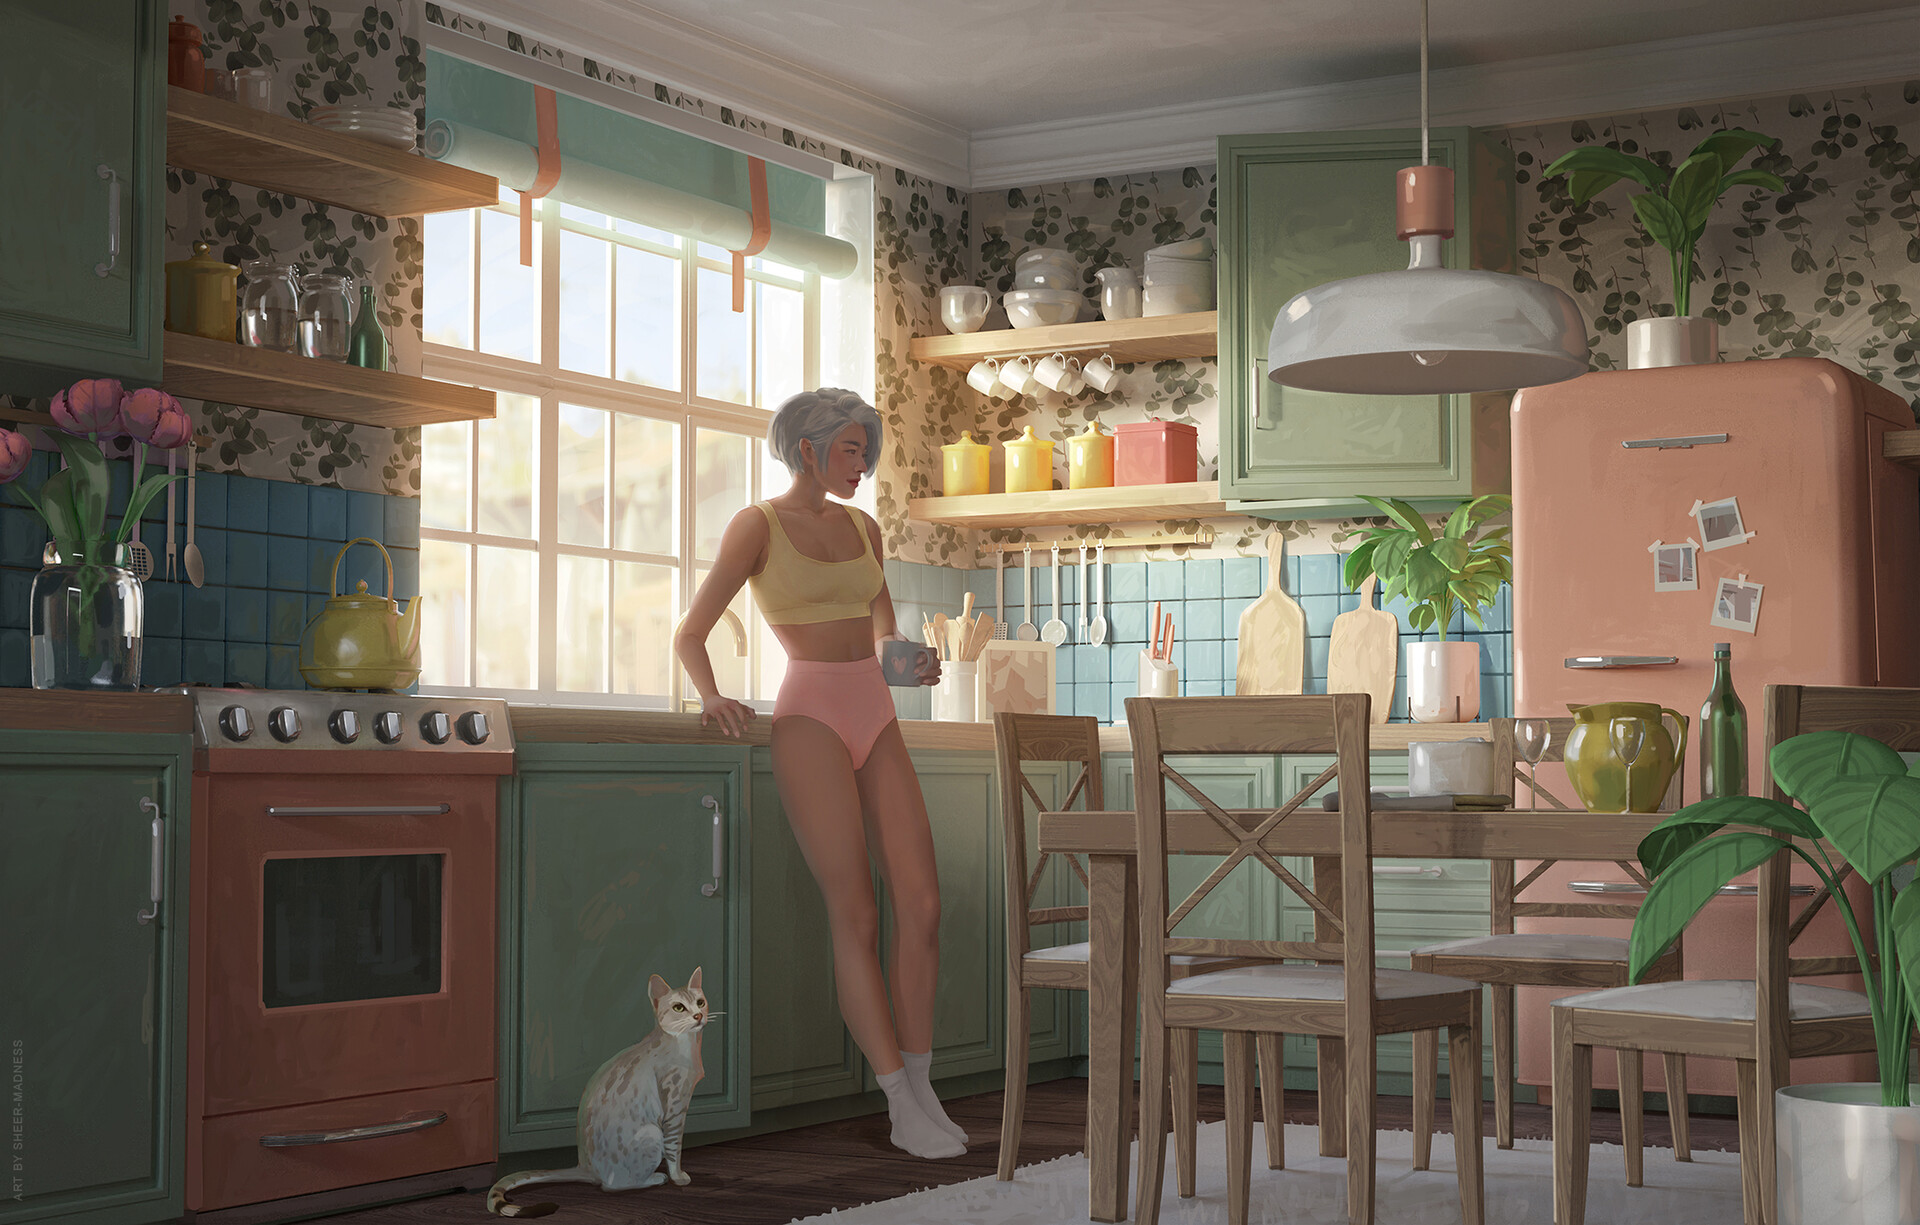 General 1920x1225 artwork indoors cats animals kitchen oven table cup fridge gray hair socks morning